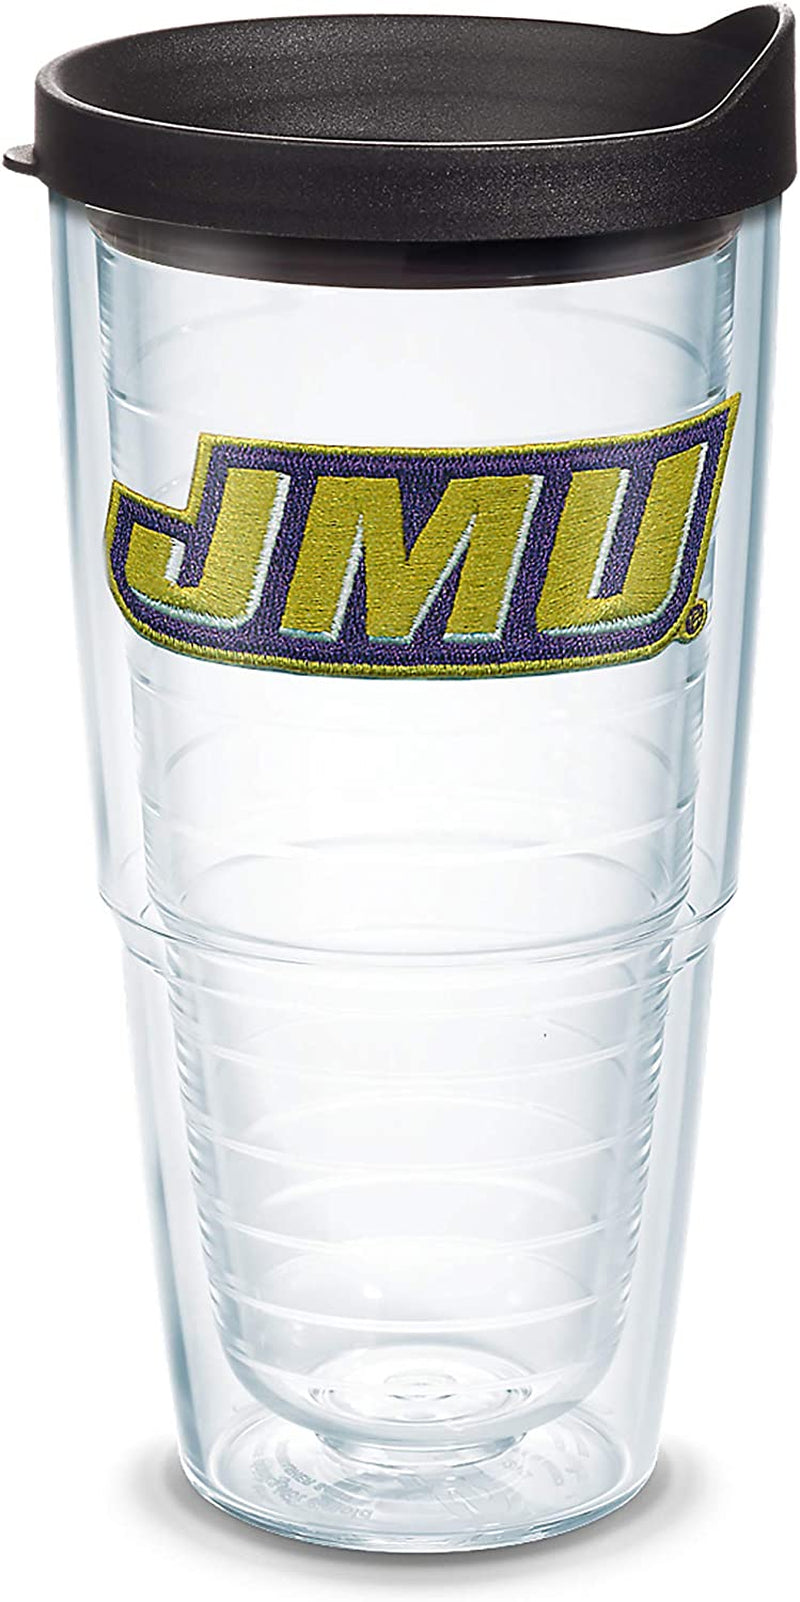 Tervis Made in USA Double Walled James Madison University JMU Dukes Insulated Tumbler Cup Keeps Drinks Cold & Hot, 24Oz - Black Lid, Primary Logo Home & Garden > Kitchen & Dining > Tableware > Drinkware Tervis Primary Logo 24oz - Black Lid 